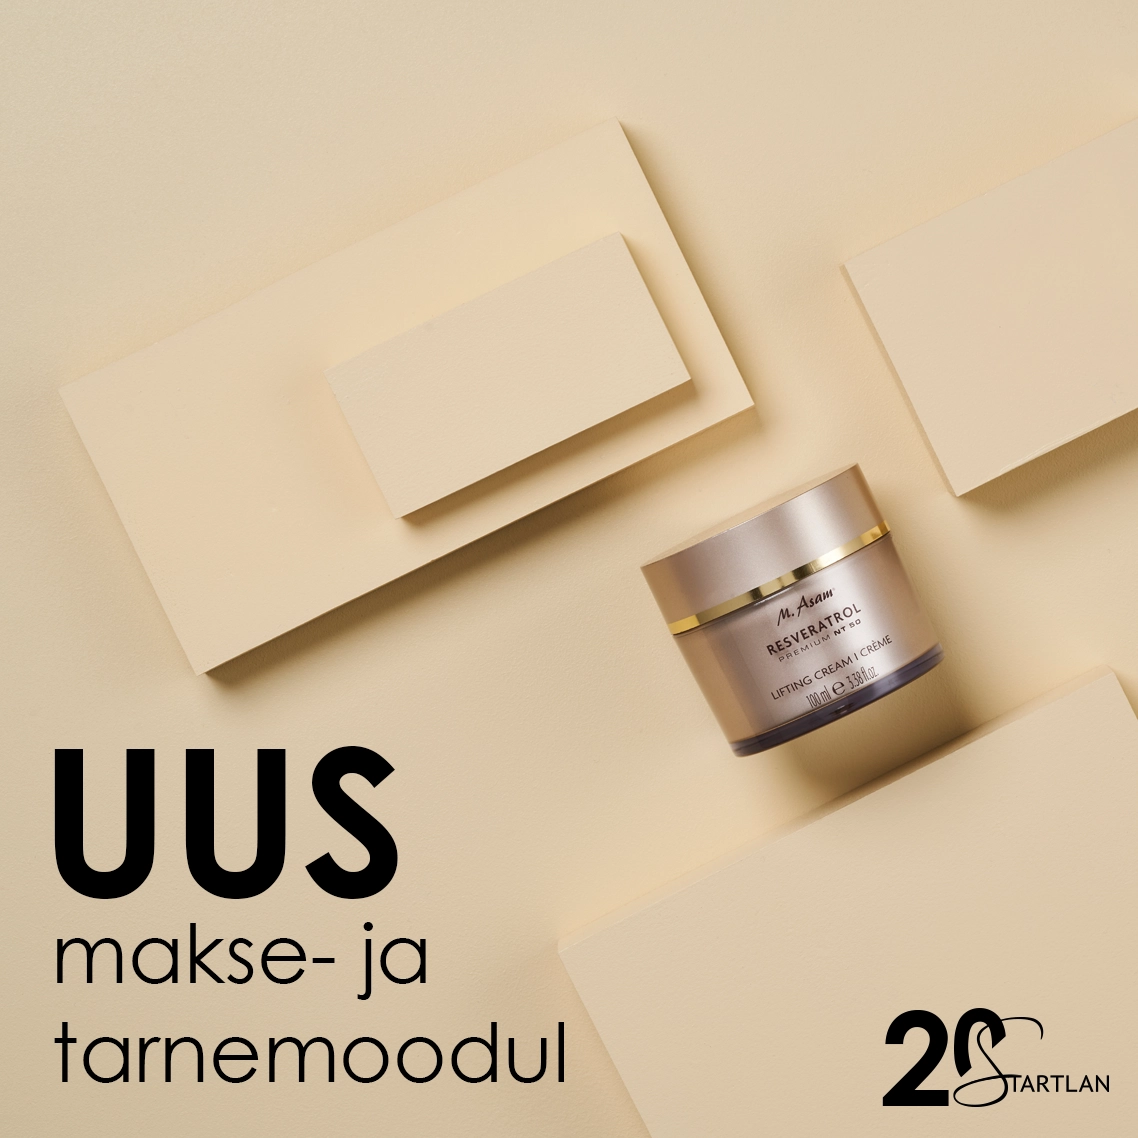 You are currently viewing UUS makse- ja tarnemoodul